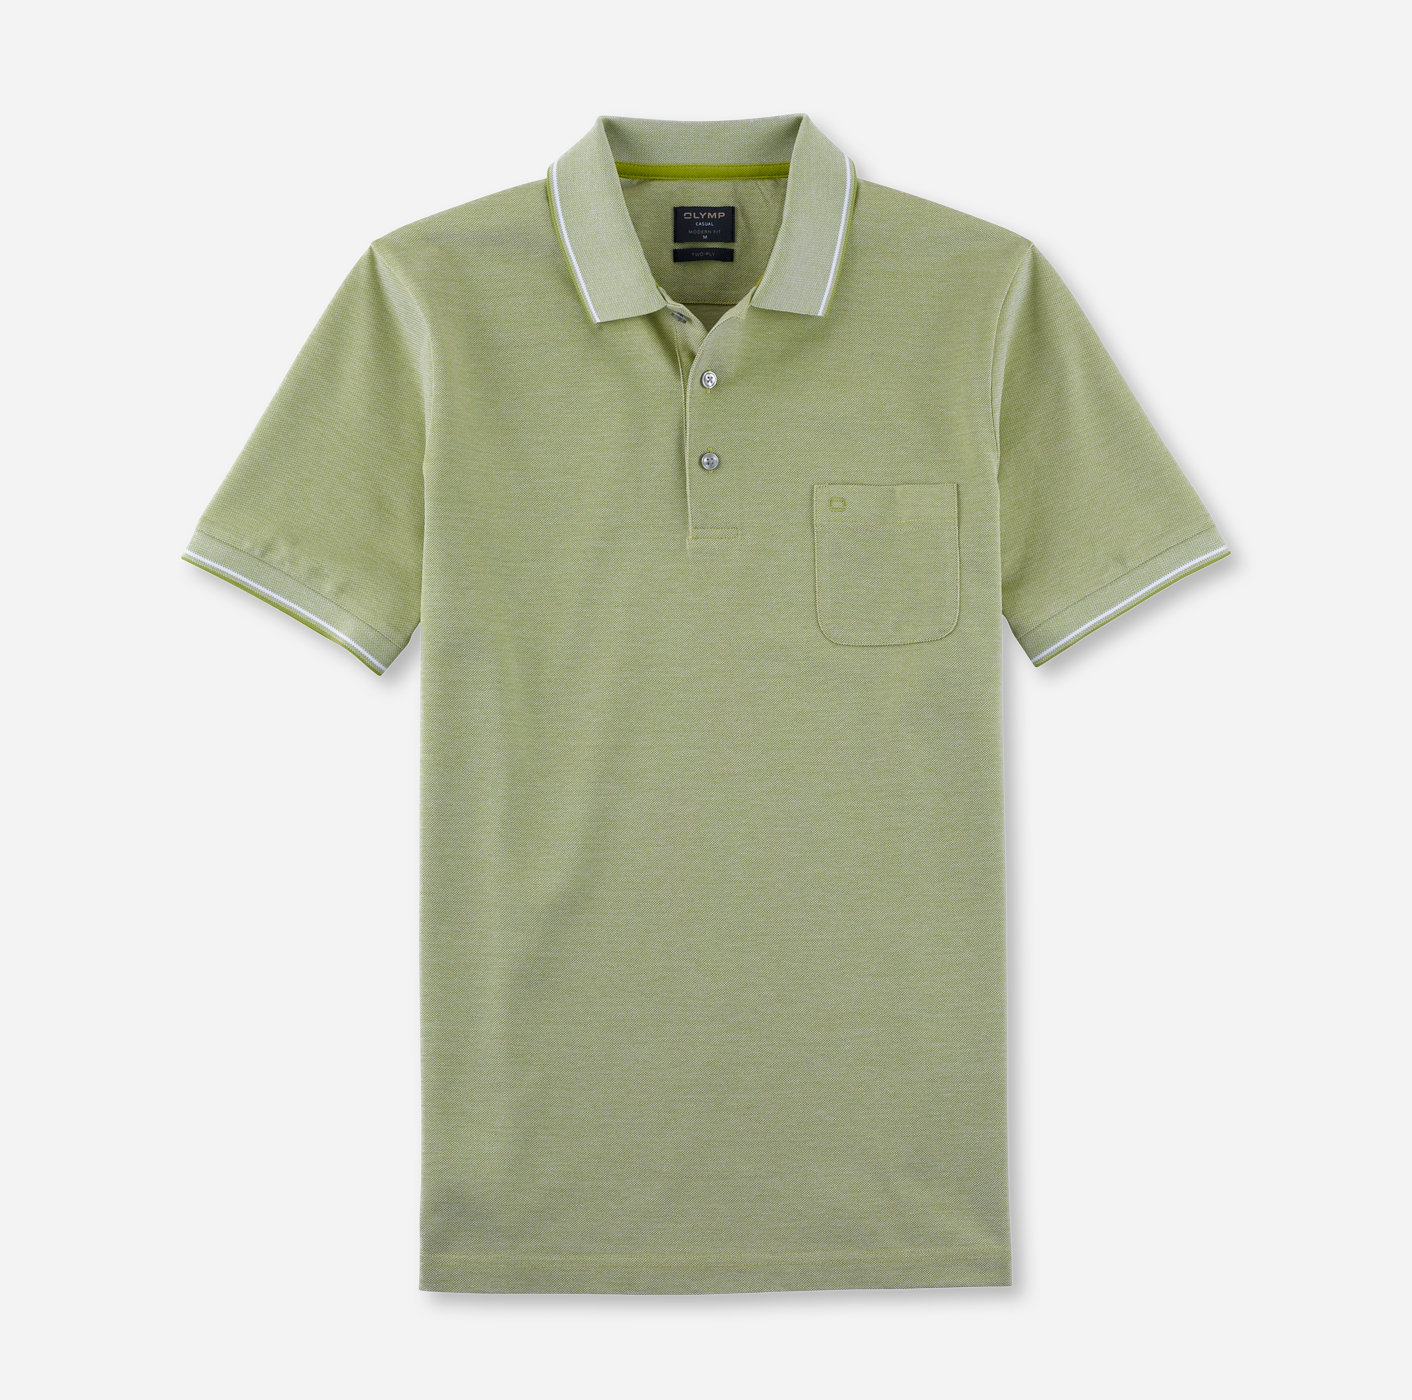 OLYMP Casual Polo, modern fit, Limette